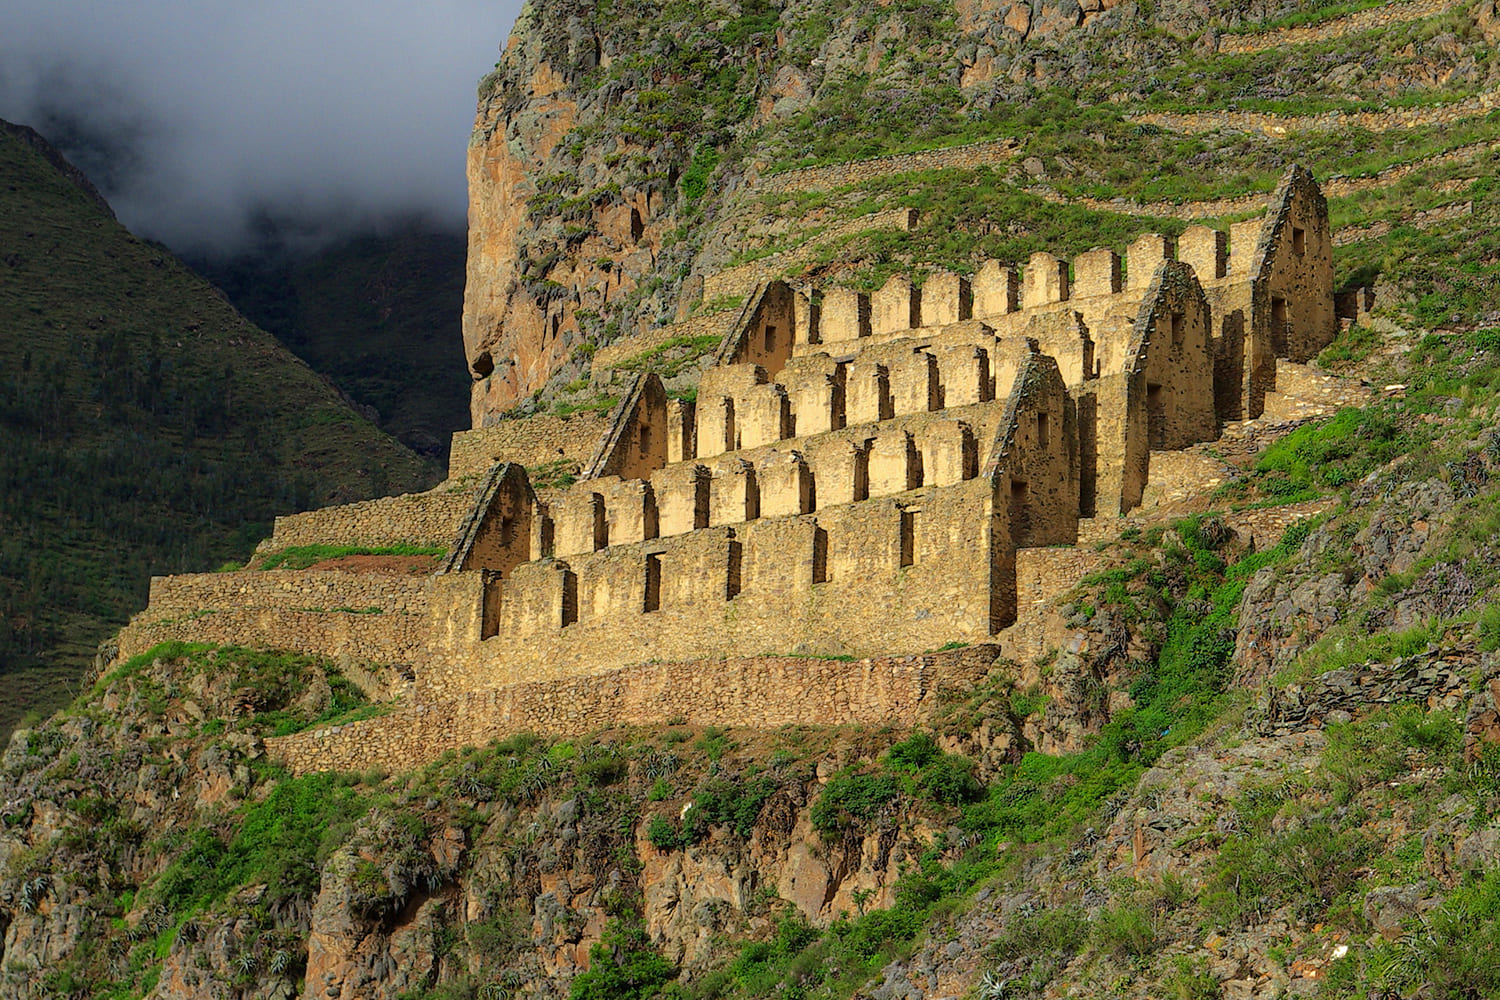 What to see in the archaeological site of Ollantaytambo?